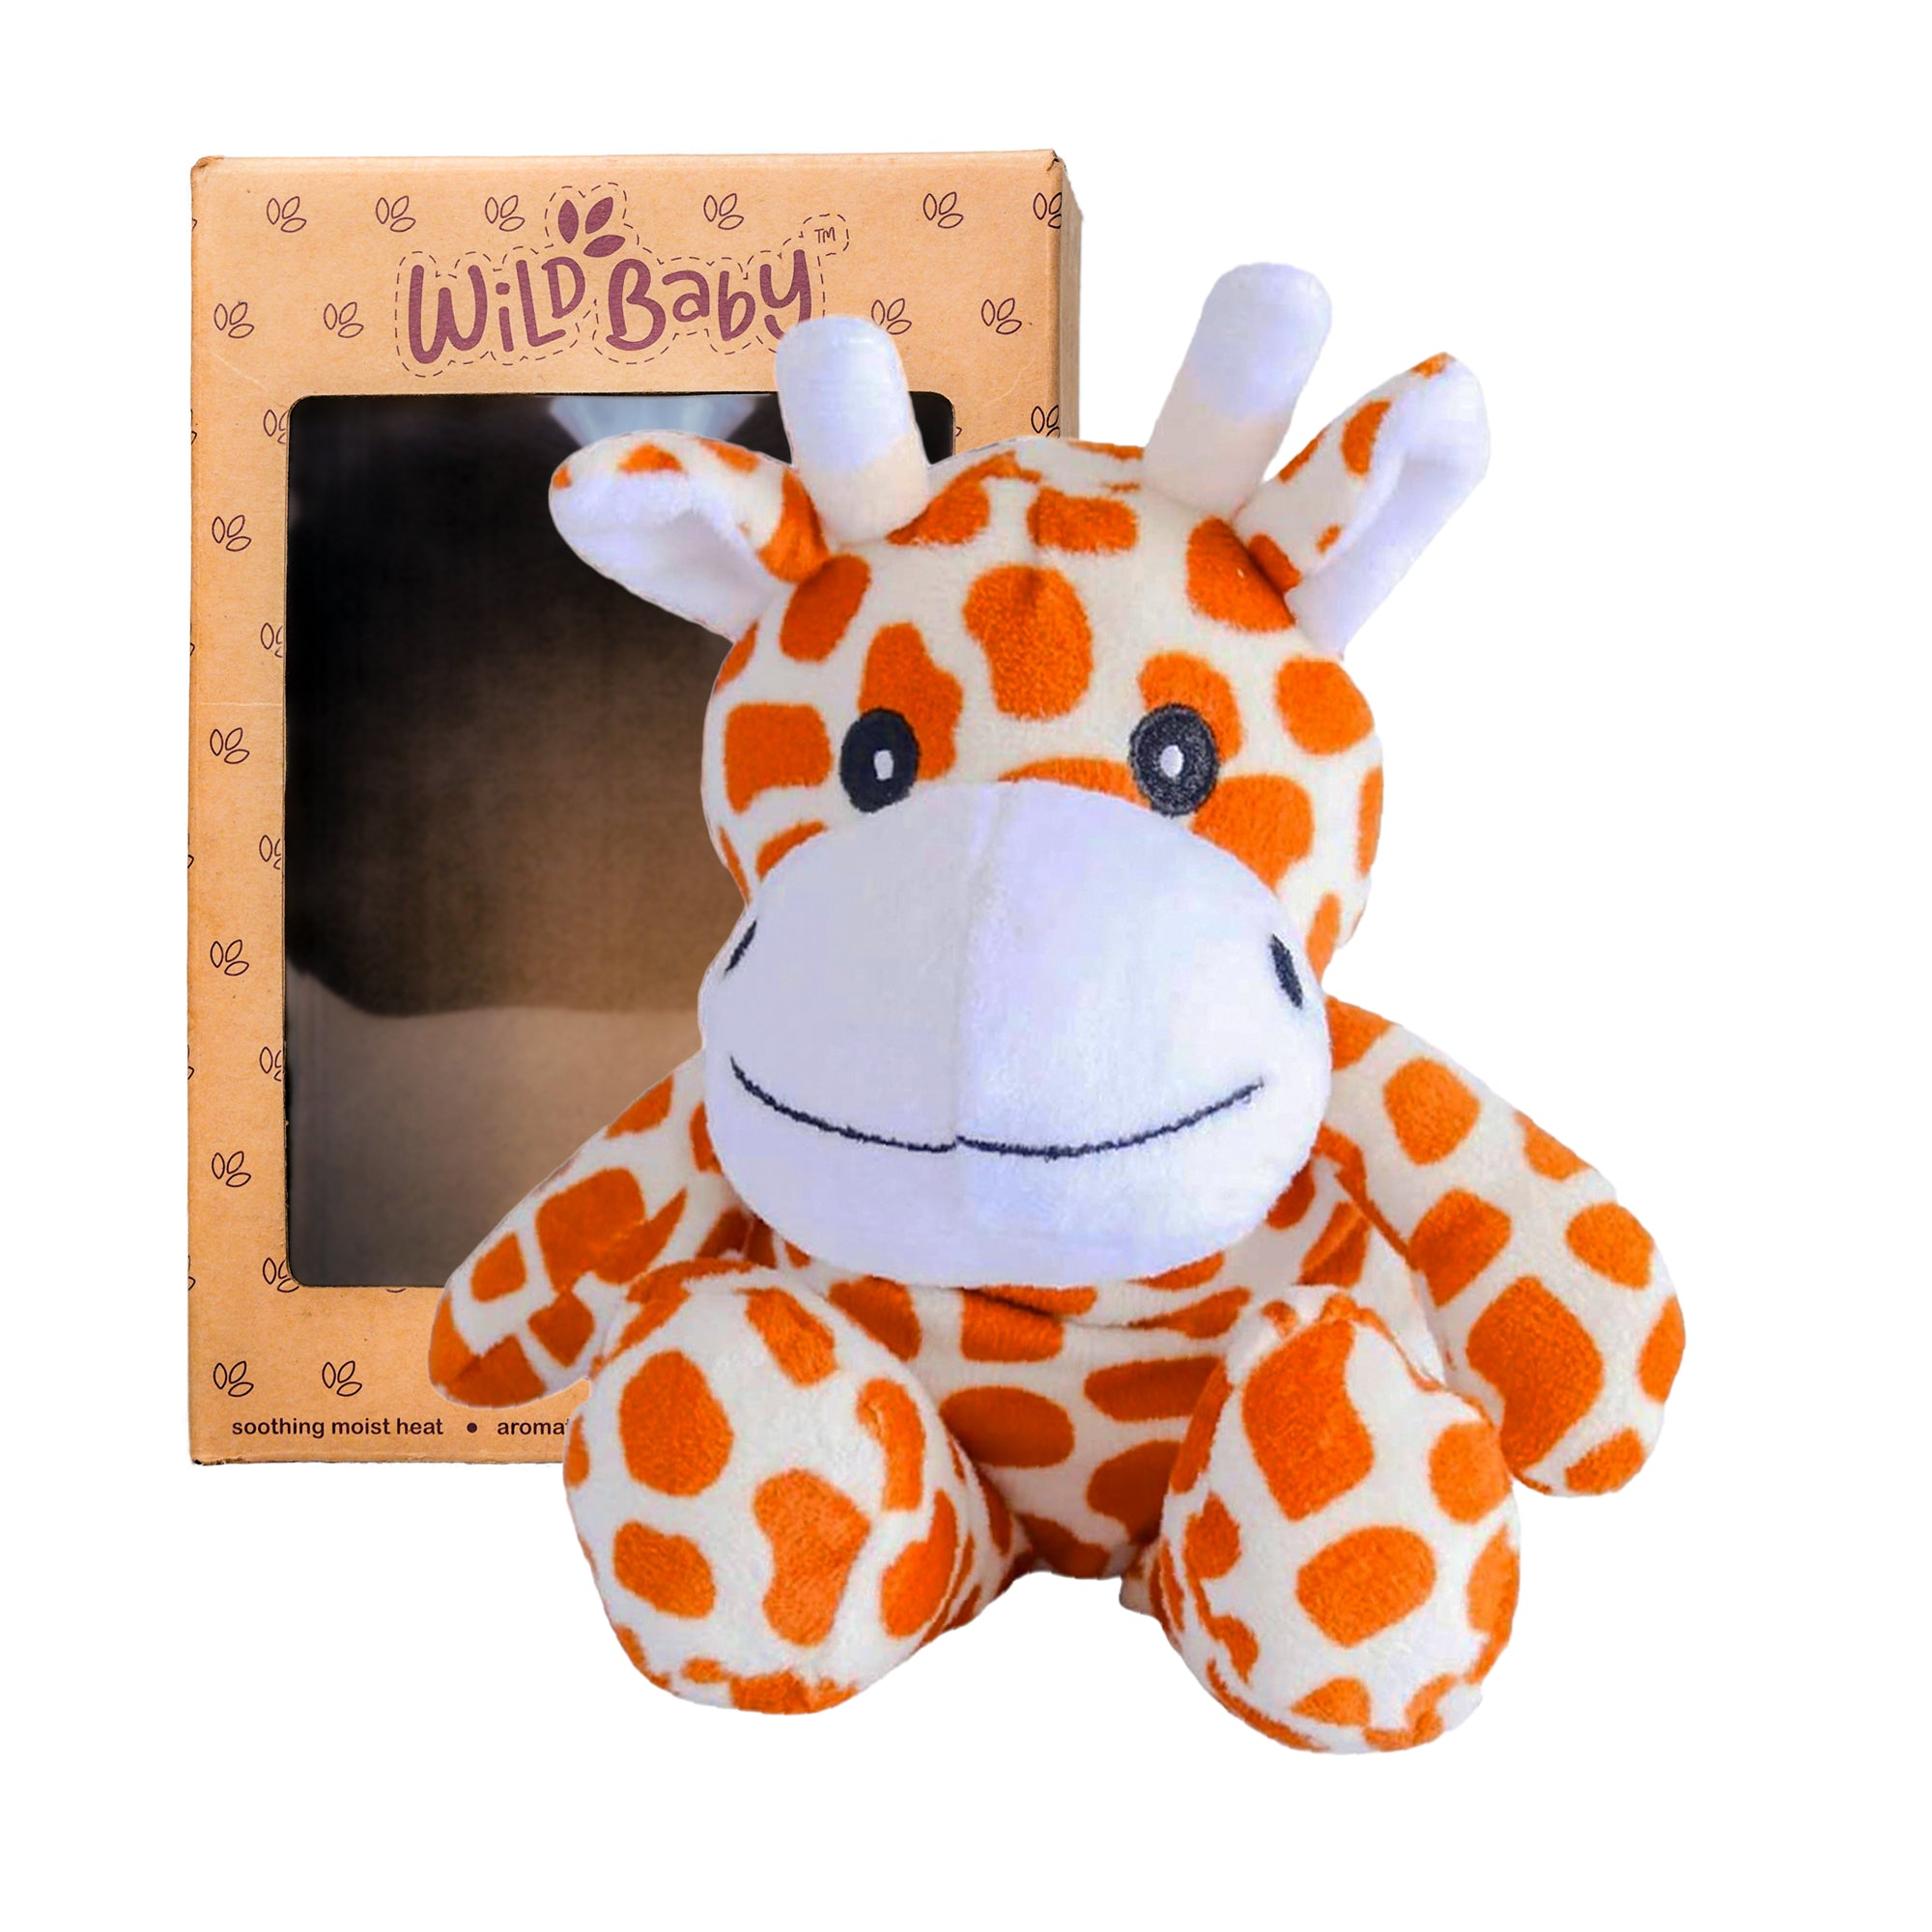 Giraffe Stuffed Animal - Microwaveable Plush Toy with Hot Cold Pack